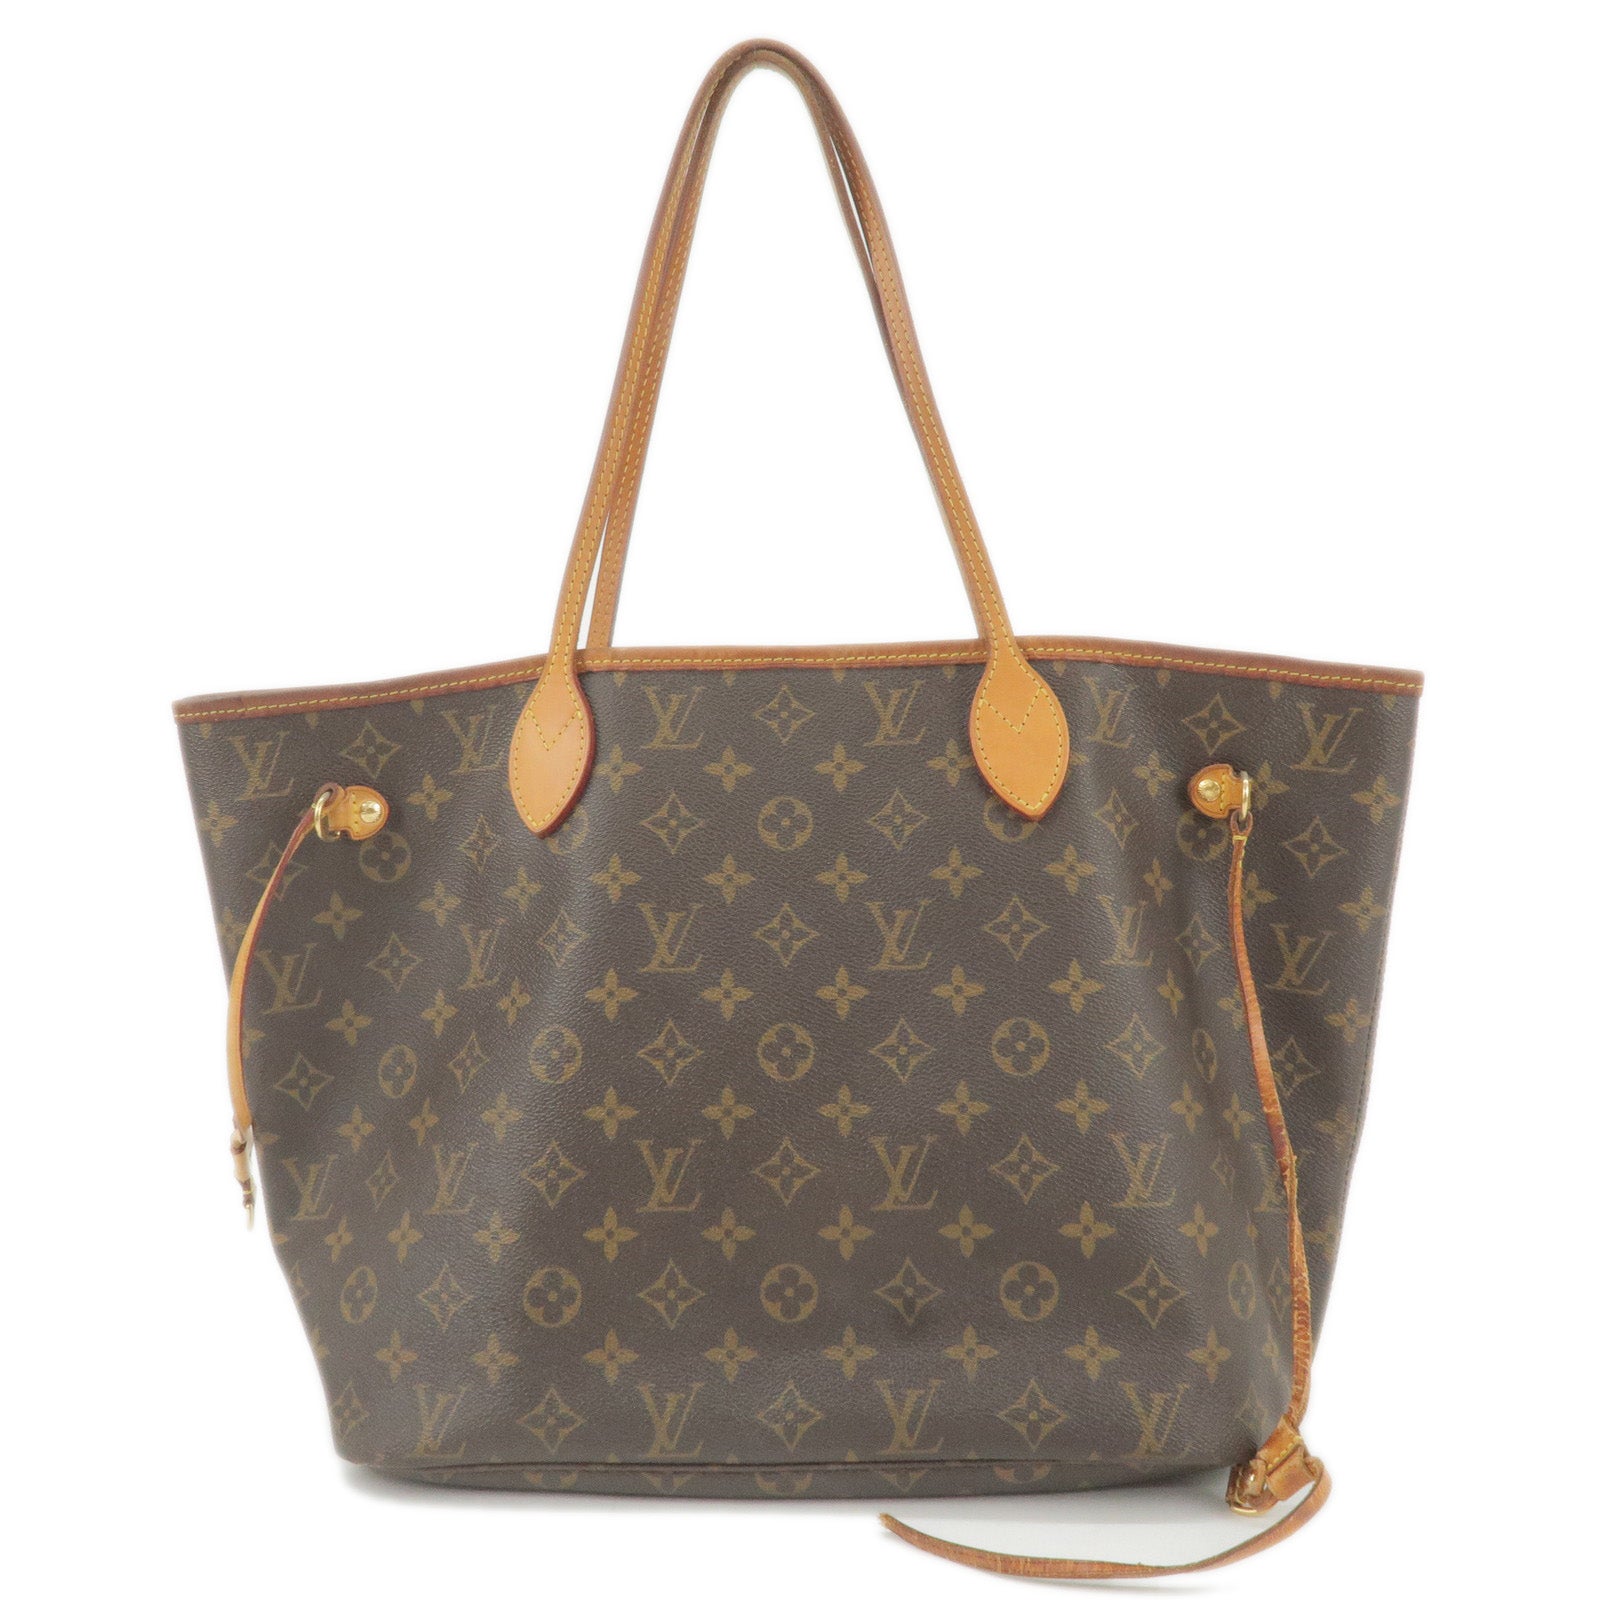 A Louis Vuitton Bag You Can't Buy in Stores: The Neverfull